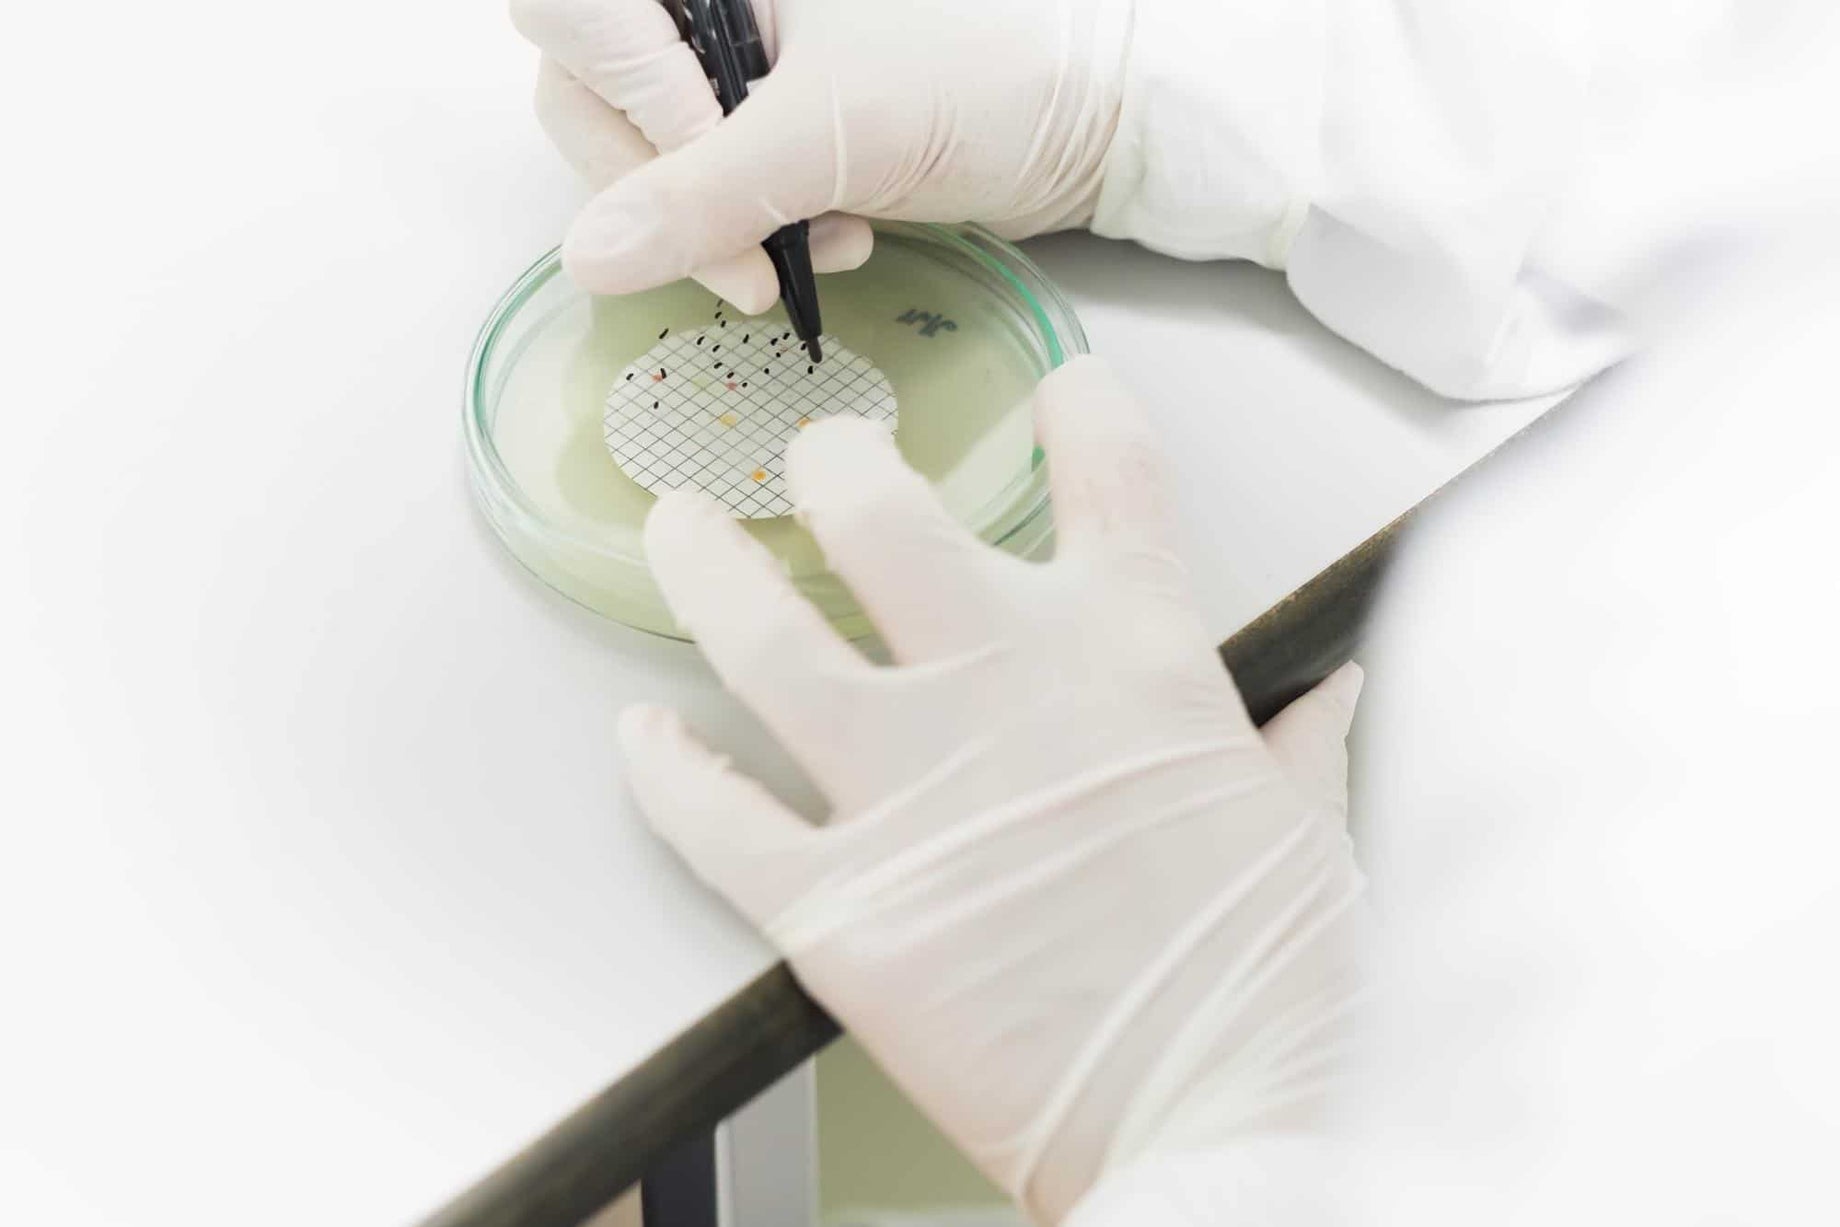 Probiotic Bacteria Colony Forming Units Being Cultivated and Counted in an Agar Plate in a Laboratory